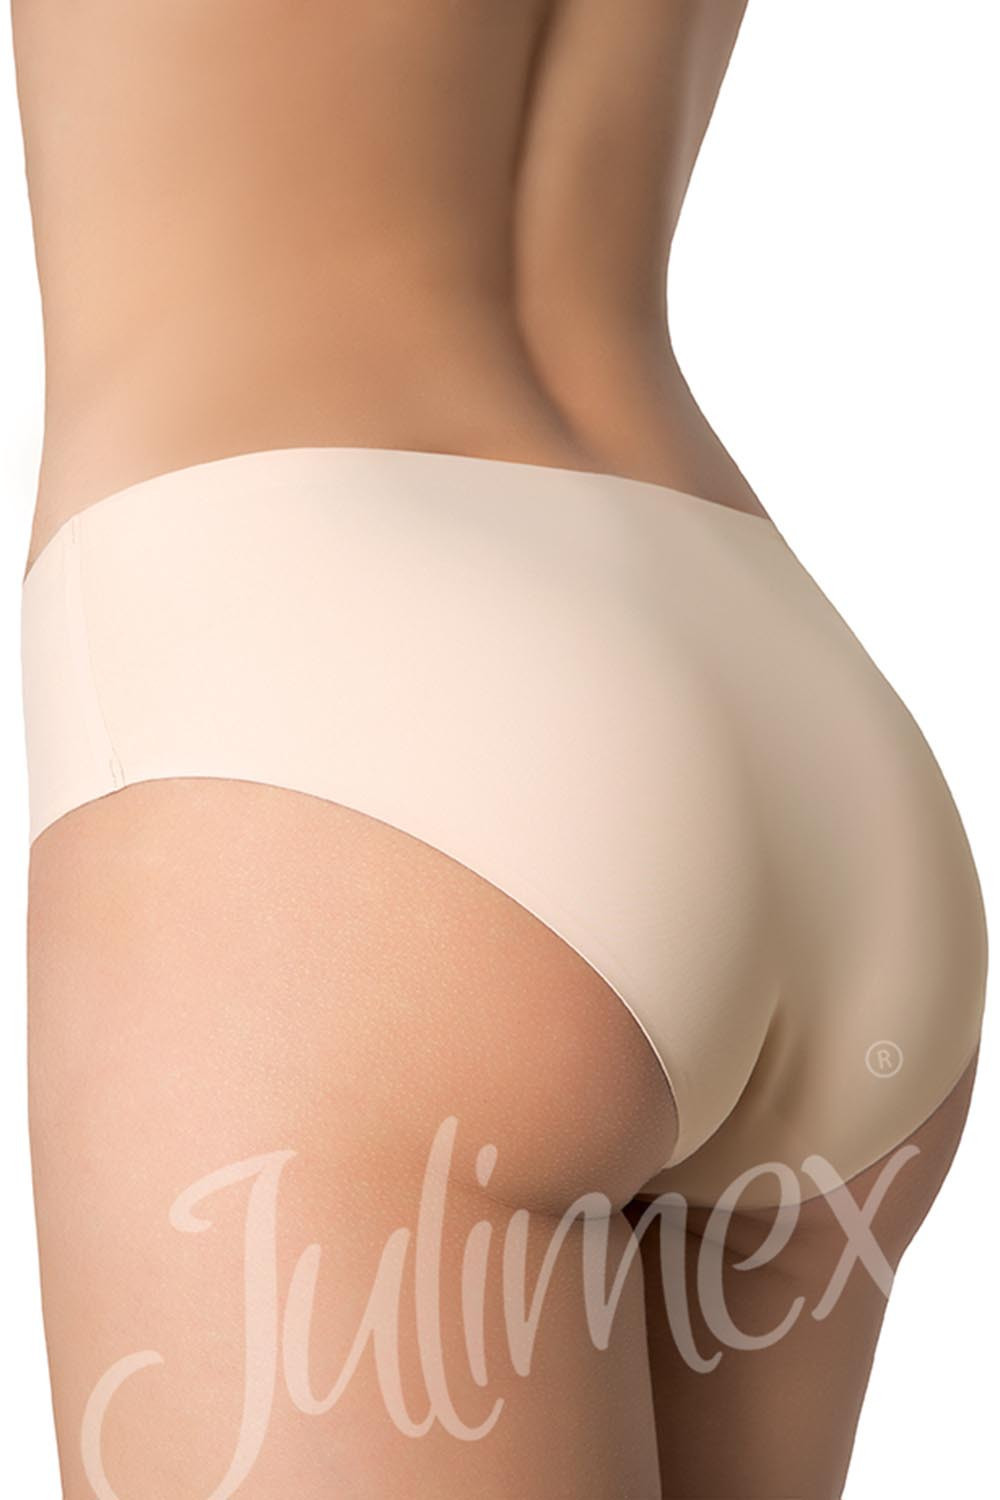 Julimex Simple panty kolor:beżowy S